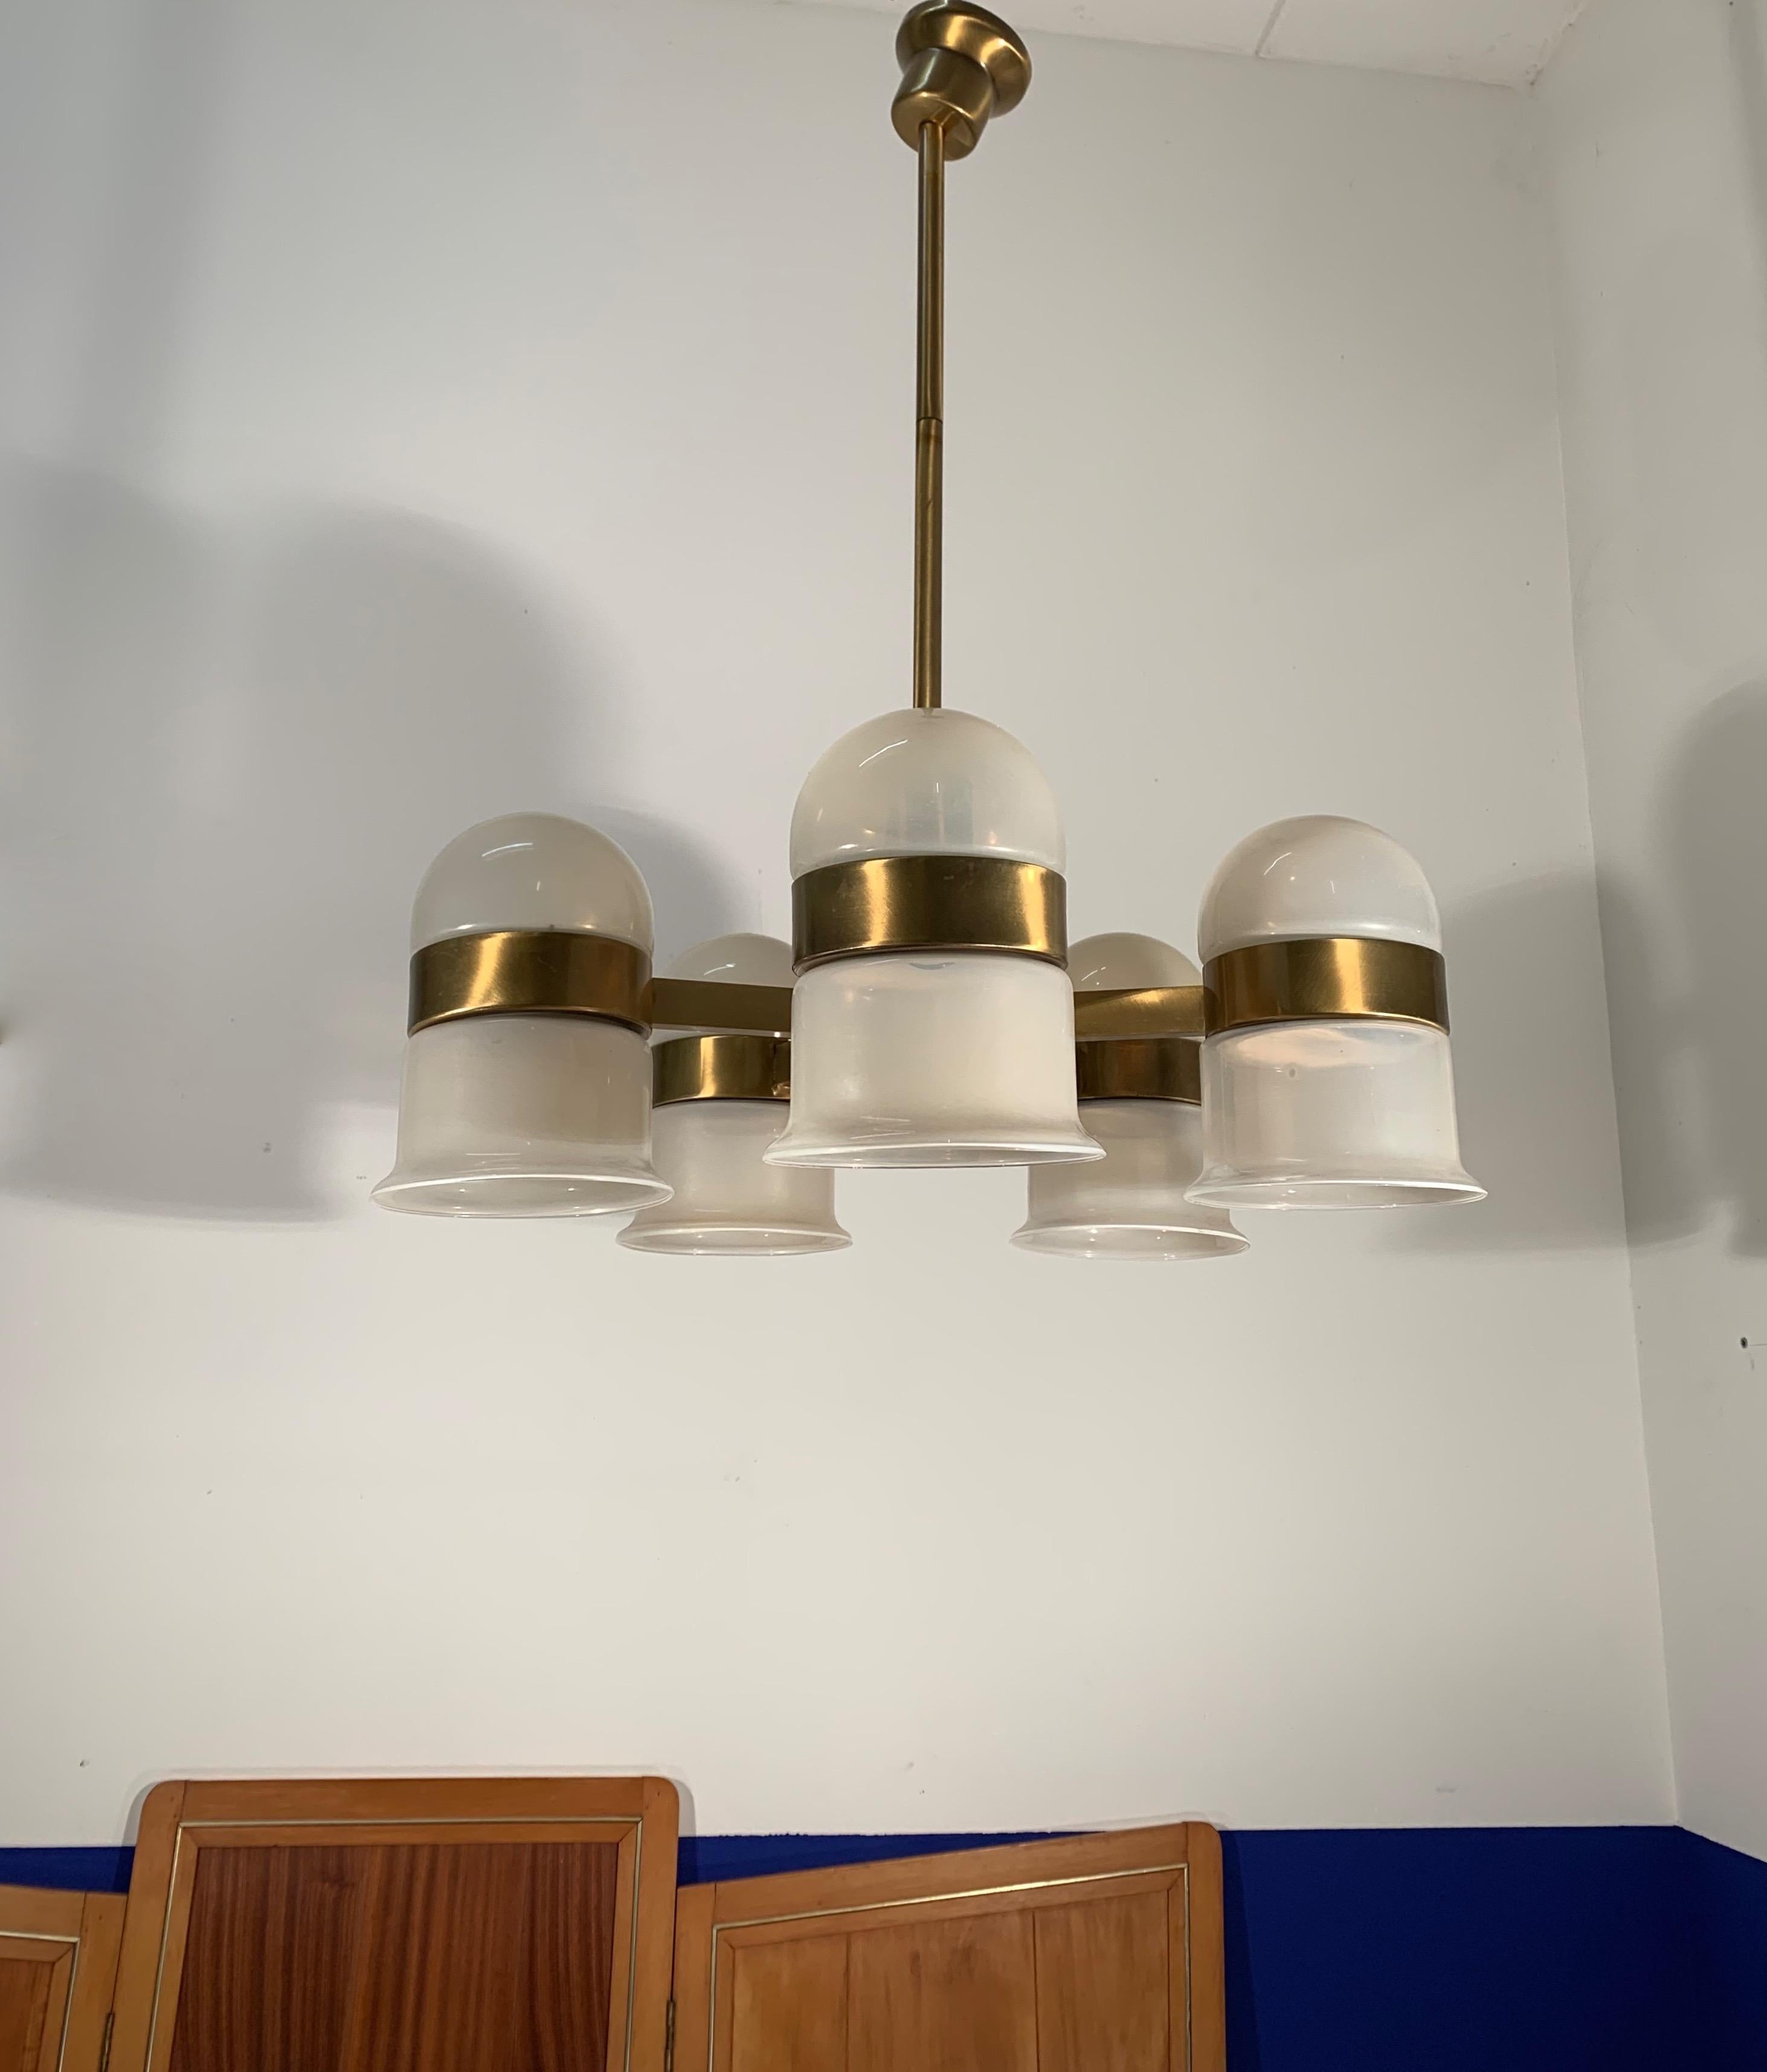 Rare, wonderful and great design chandelier.

With 20th century lighting as one of our specialities, we could not have been more happy to find this chandelier. We may not know who designed it, but we recognize a unique and striking light when we see